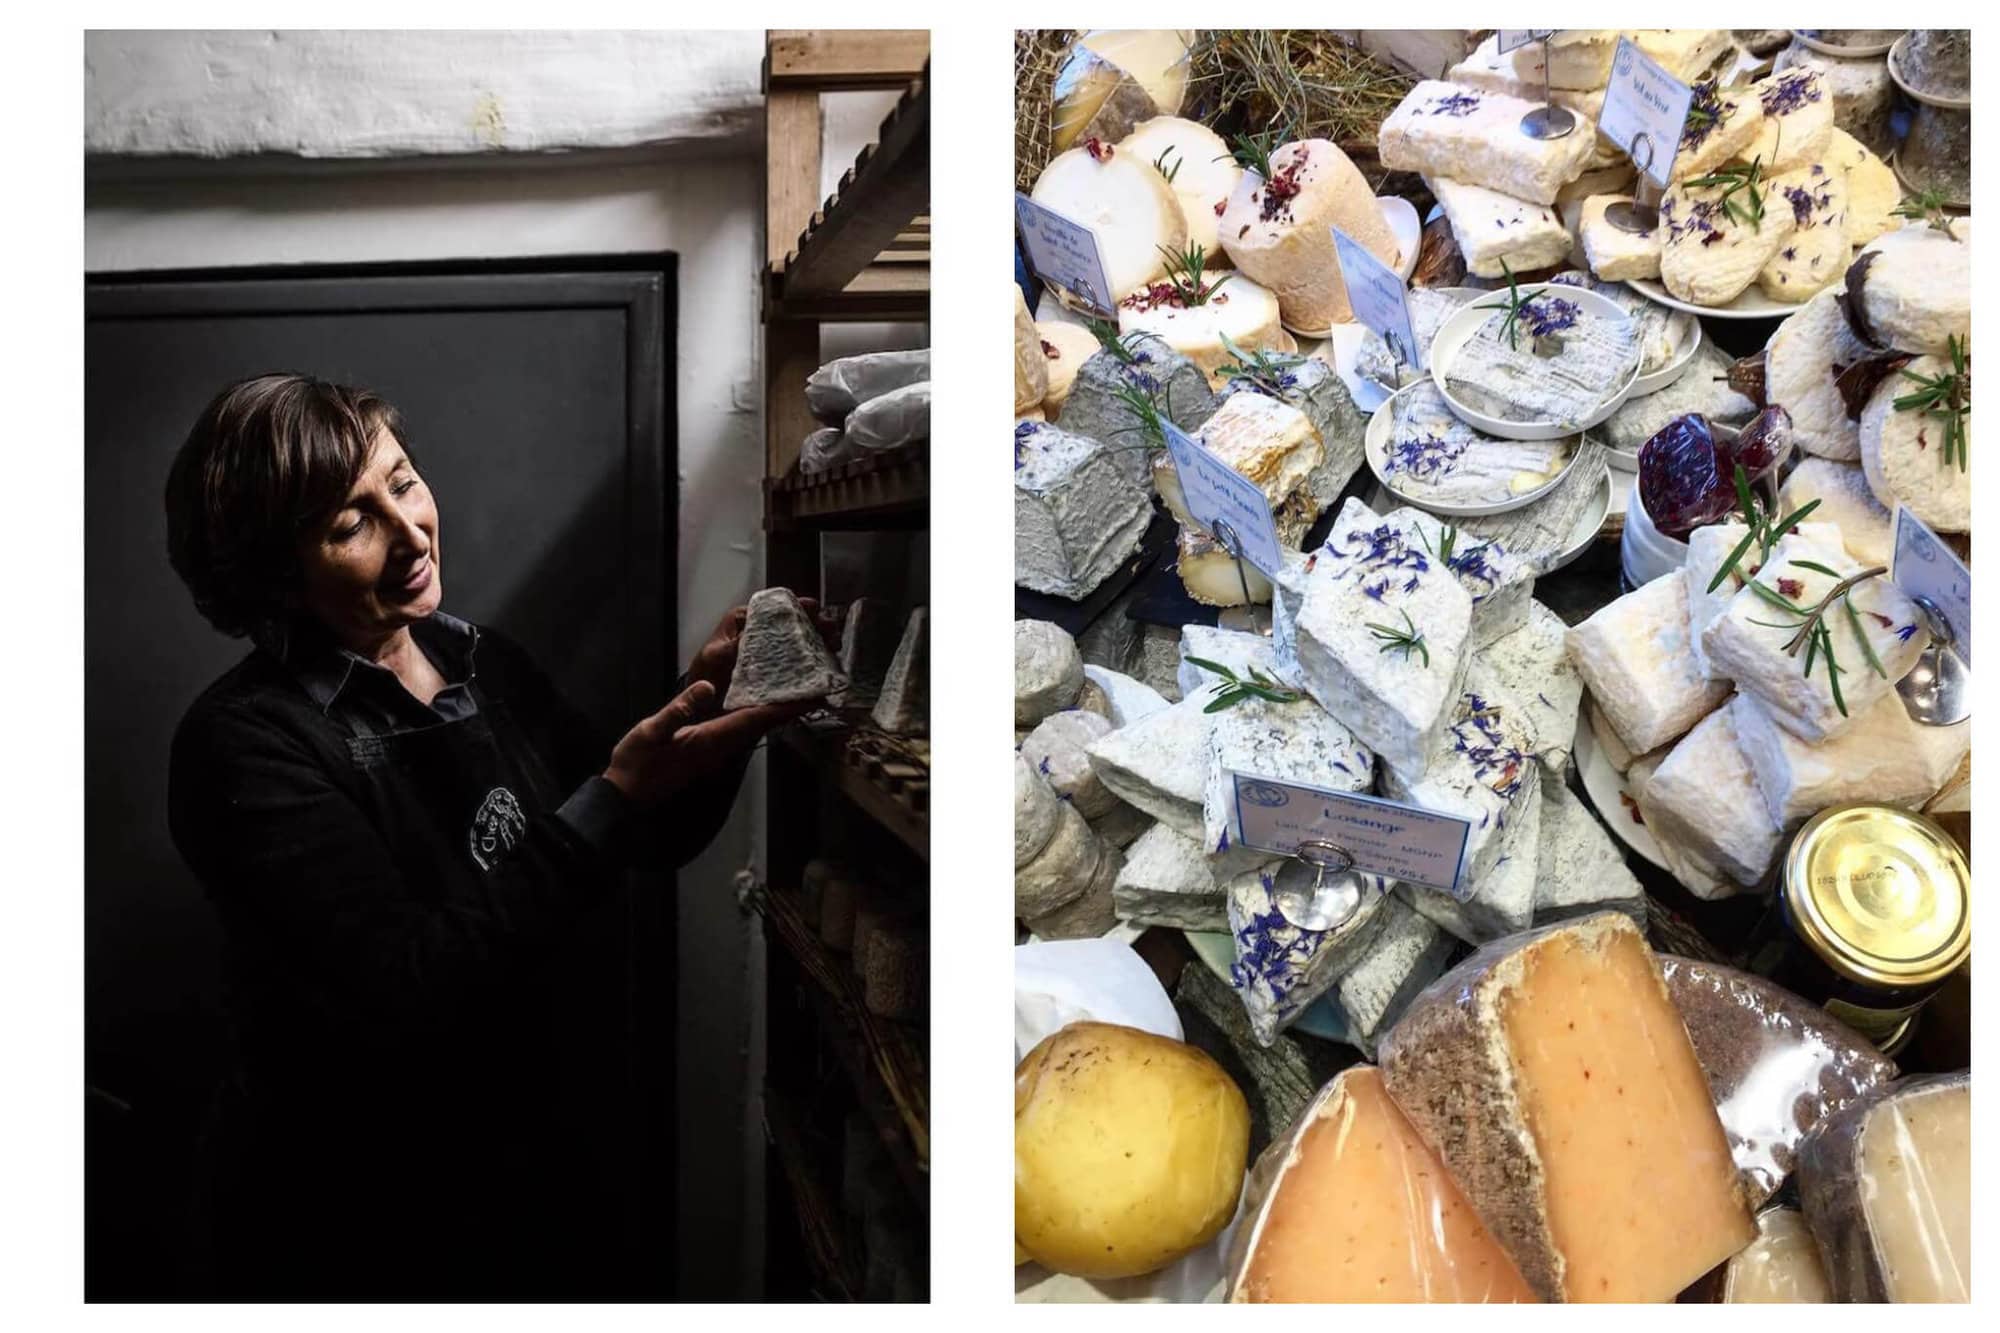 Left: Virginie of Fromagerie Chez Virginie is in a store room. She is standing next to a shelf filled with different types of French cheeses and she is holding a cheese and smiling at it. She is wearing a black shirt and a black apron. Right: An aerial view of a table filled with different types of French cheeses at Fromagerie Chez Virginie.